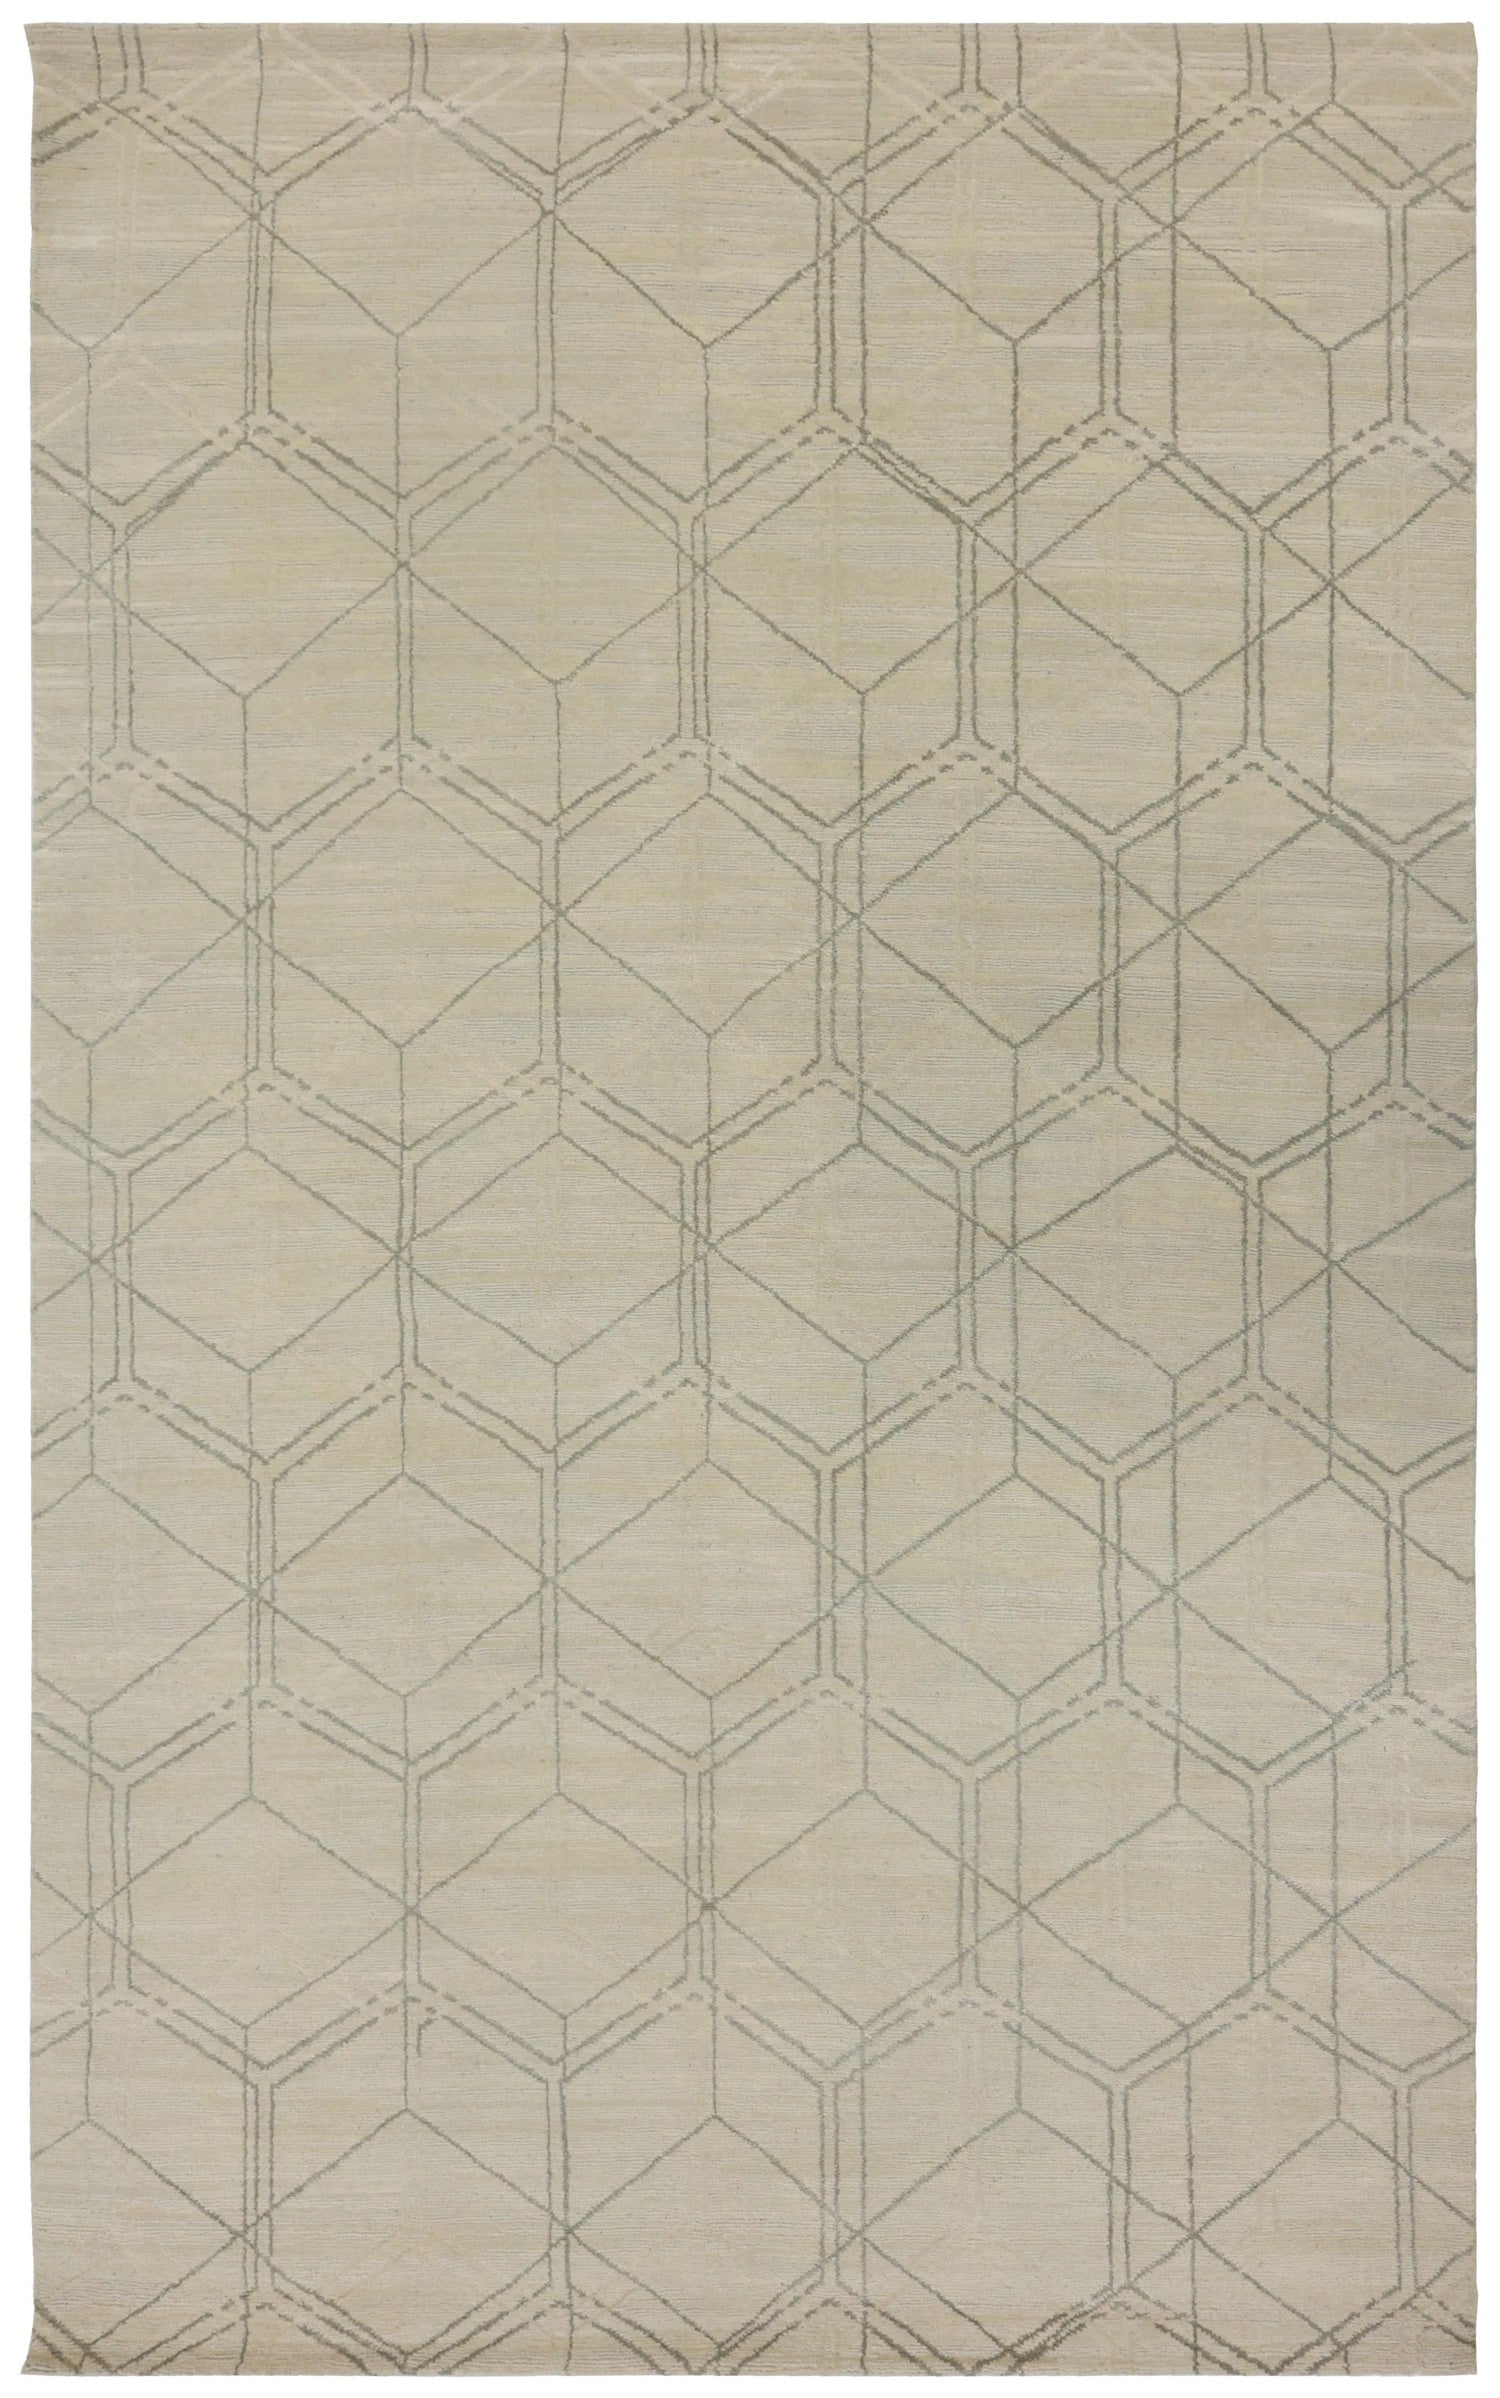 Foursquare Handwoven Transitional Rug